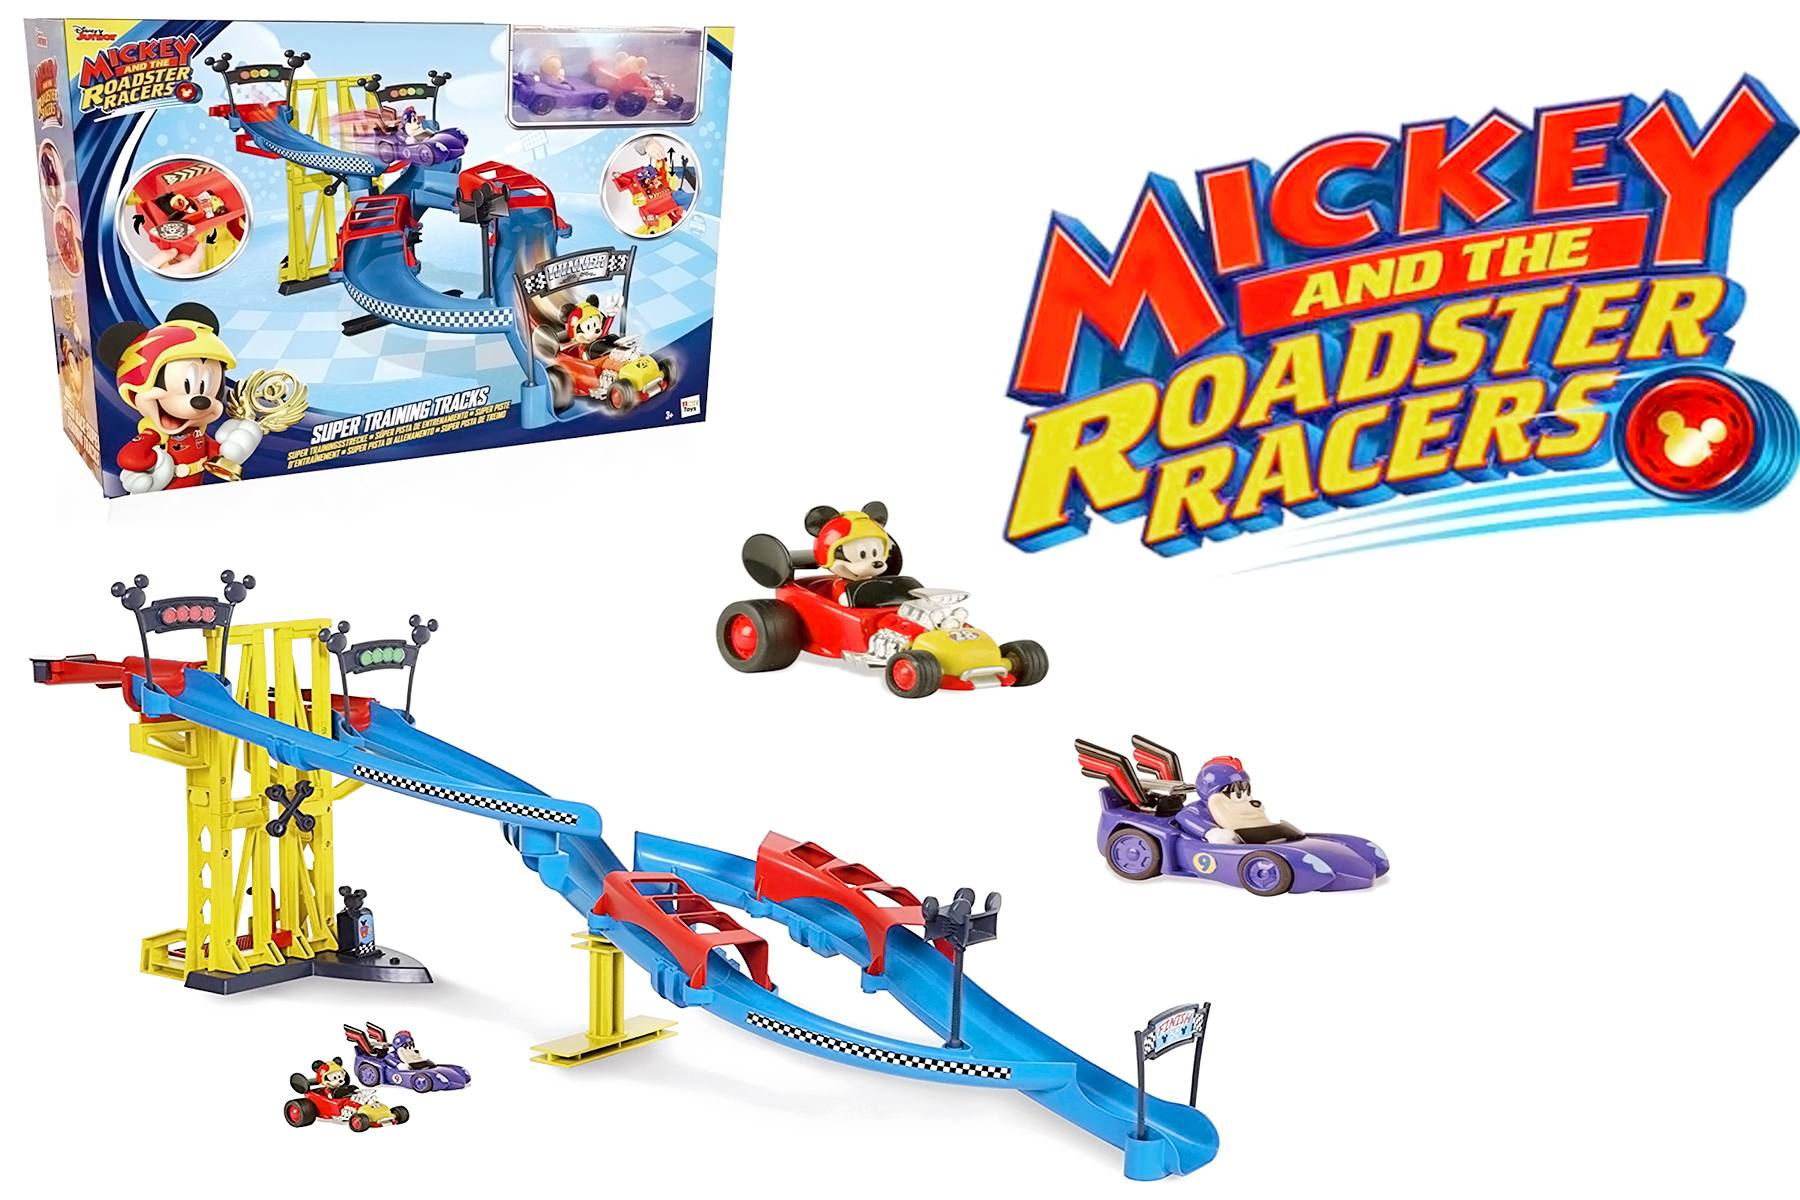 MICKEY AND THE ROADSTER RACERS SUPER TRAINING TRACKS